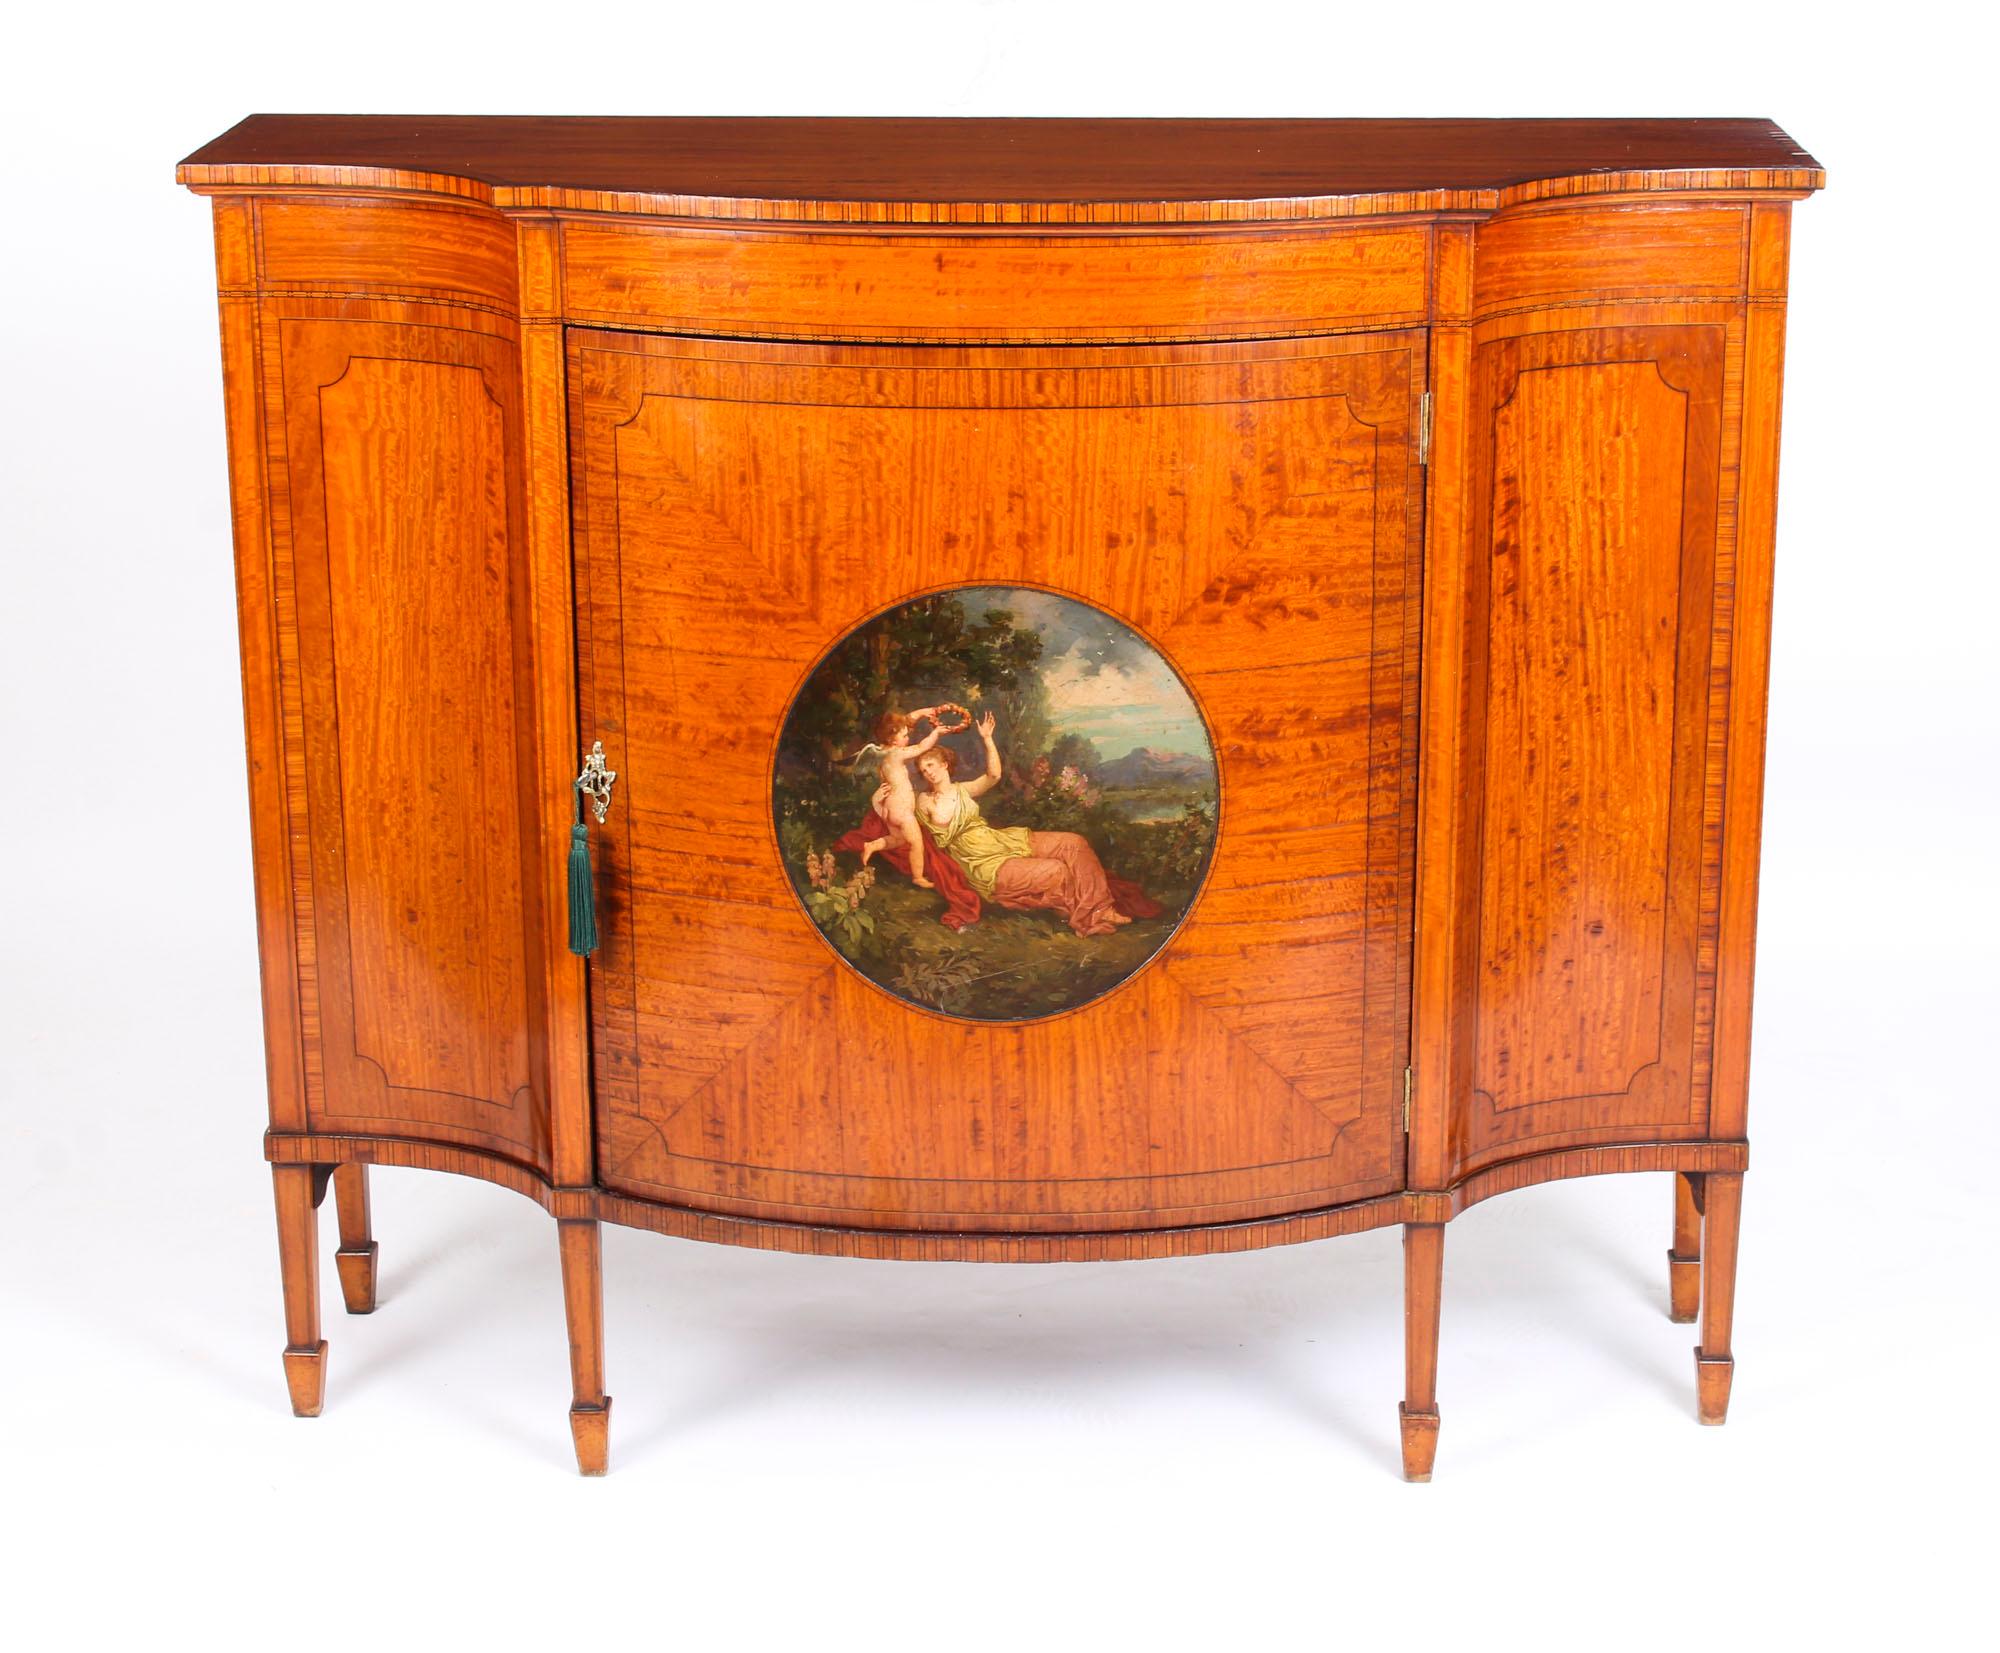 This is a truly stunning English Edwardian hand painted and inlaid shaped satinwood sideboard, circa 1900 in date.
 
This splendid crossbanded cabinet is made of the finest quality satinwood with a striking flame effect and ebony stringing. 
